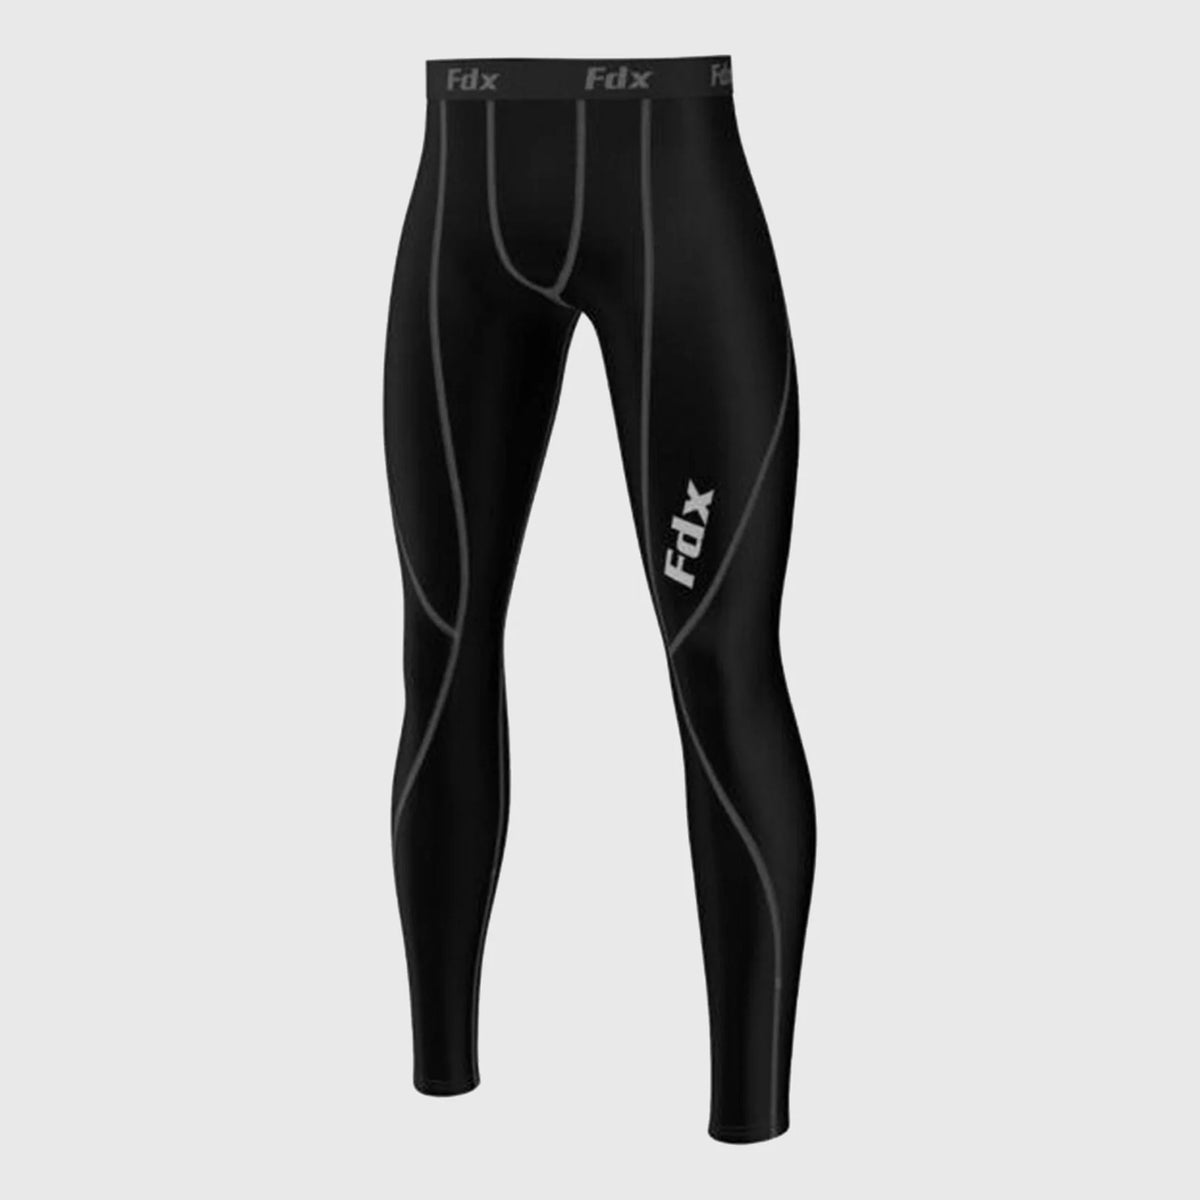 Men Thermal Compression Pants Athletic Workout Running Tights Base Layer  Bottoms